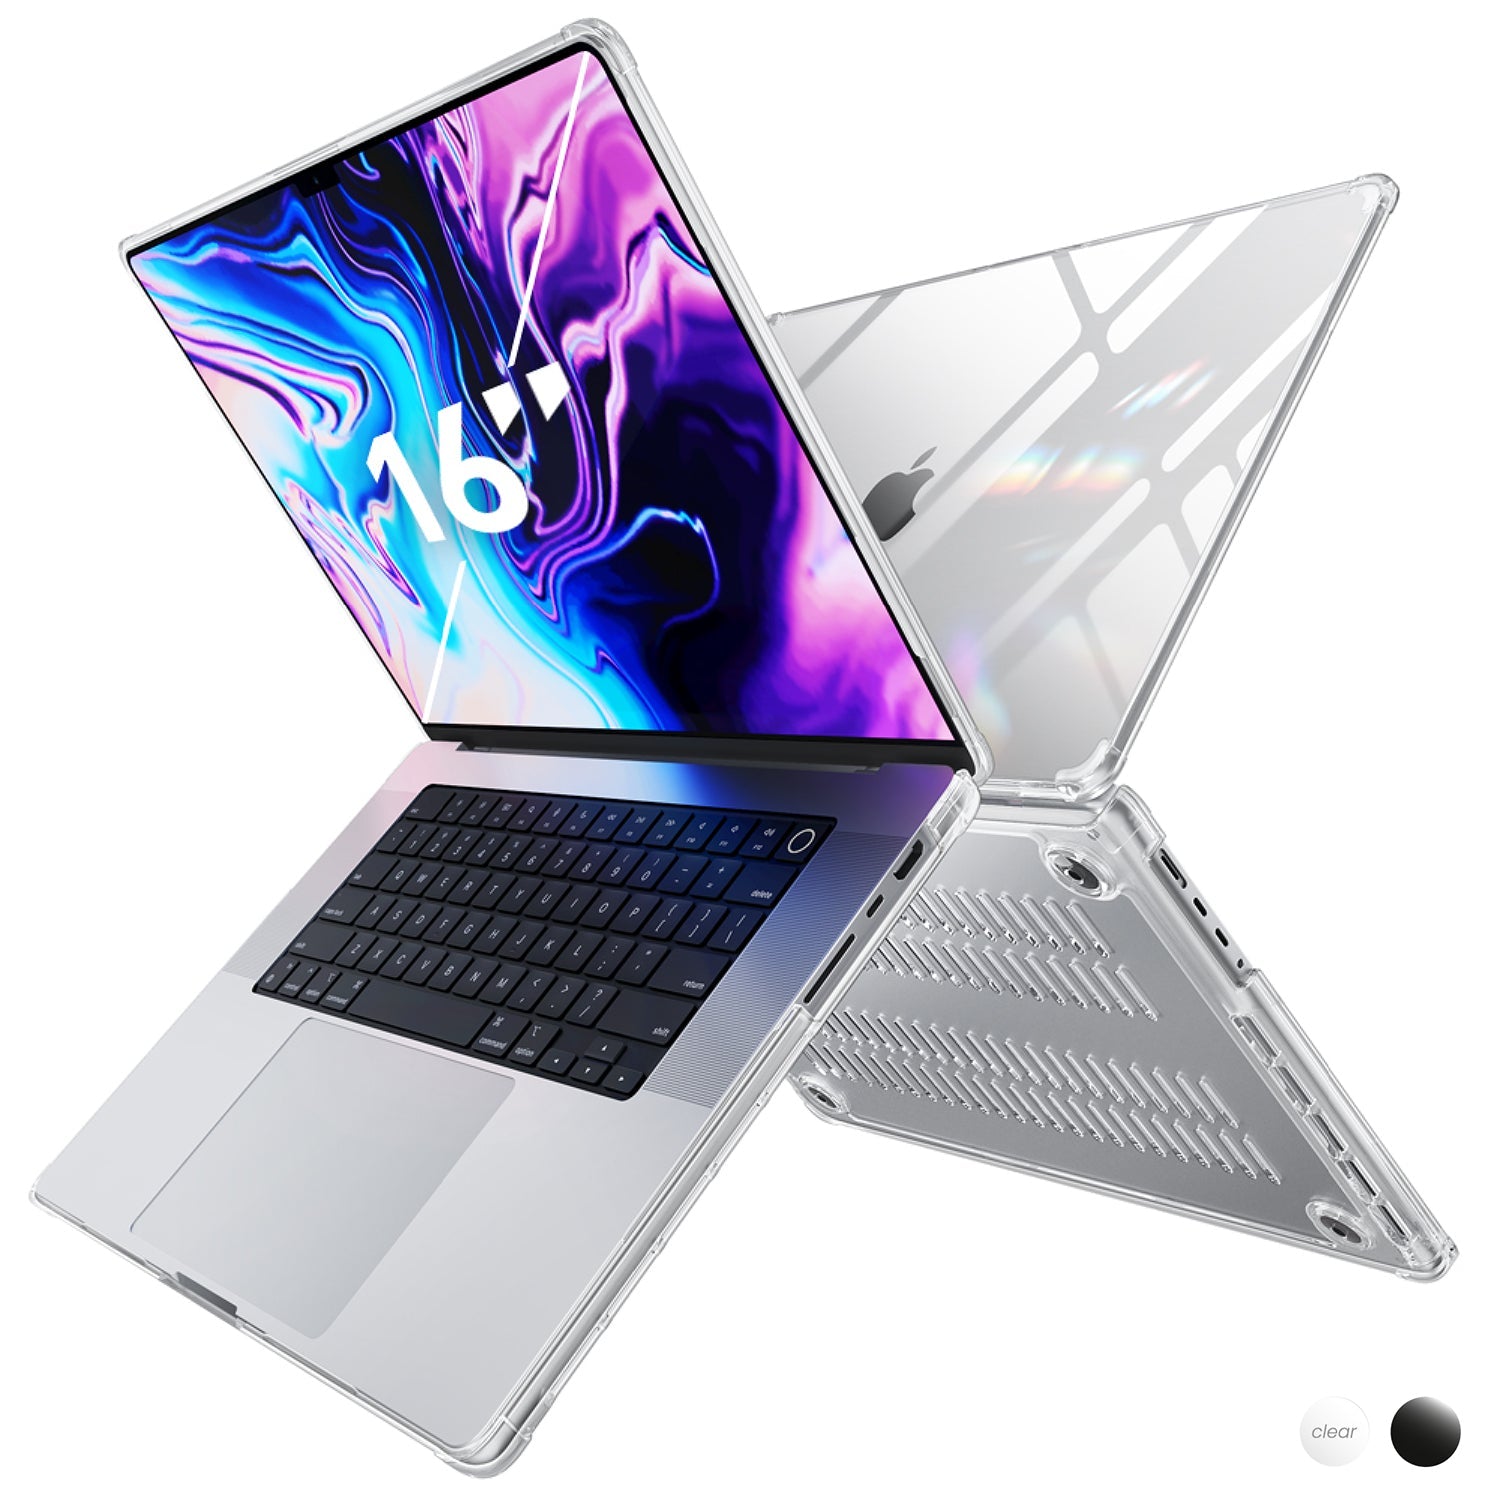 Supcase Unicorn Beetle Clear Series Case Slim Clear Protective Cover Designed for MacBook Pro 16 Inch (2021 Release) A2485 M1 Pro / M1 Max Default Supcase 